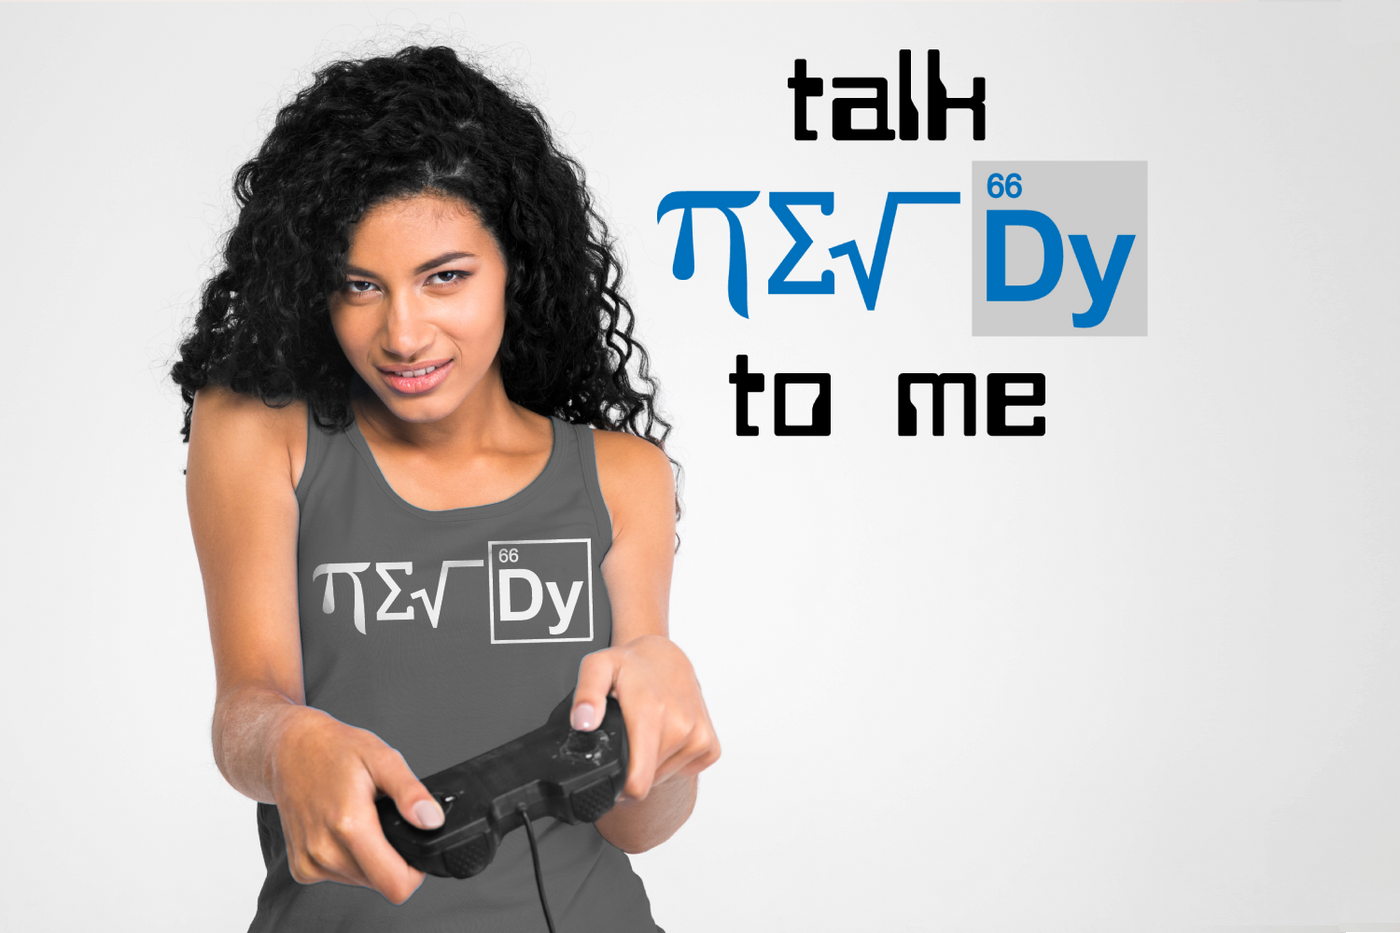 Woman of color holds a video game controller with a determined look. On her tank top it says "NERDY" spelled out of science and math symbols. On the wall behind her it says "talk NERDY to me" with those same symbols for the word "NERDY"